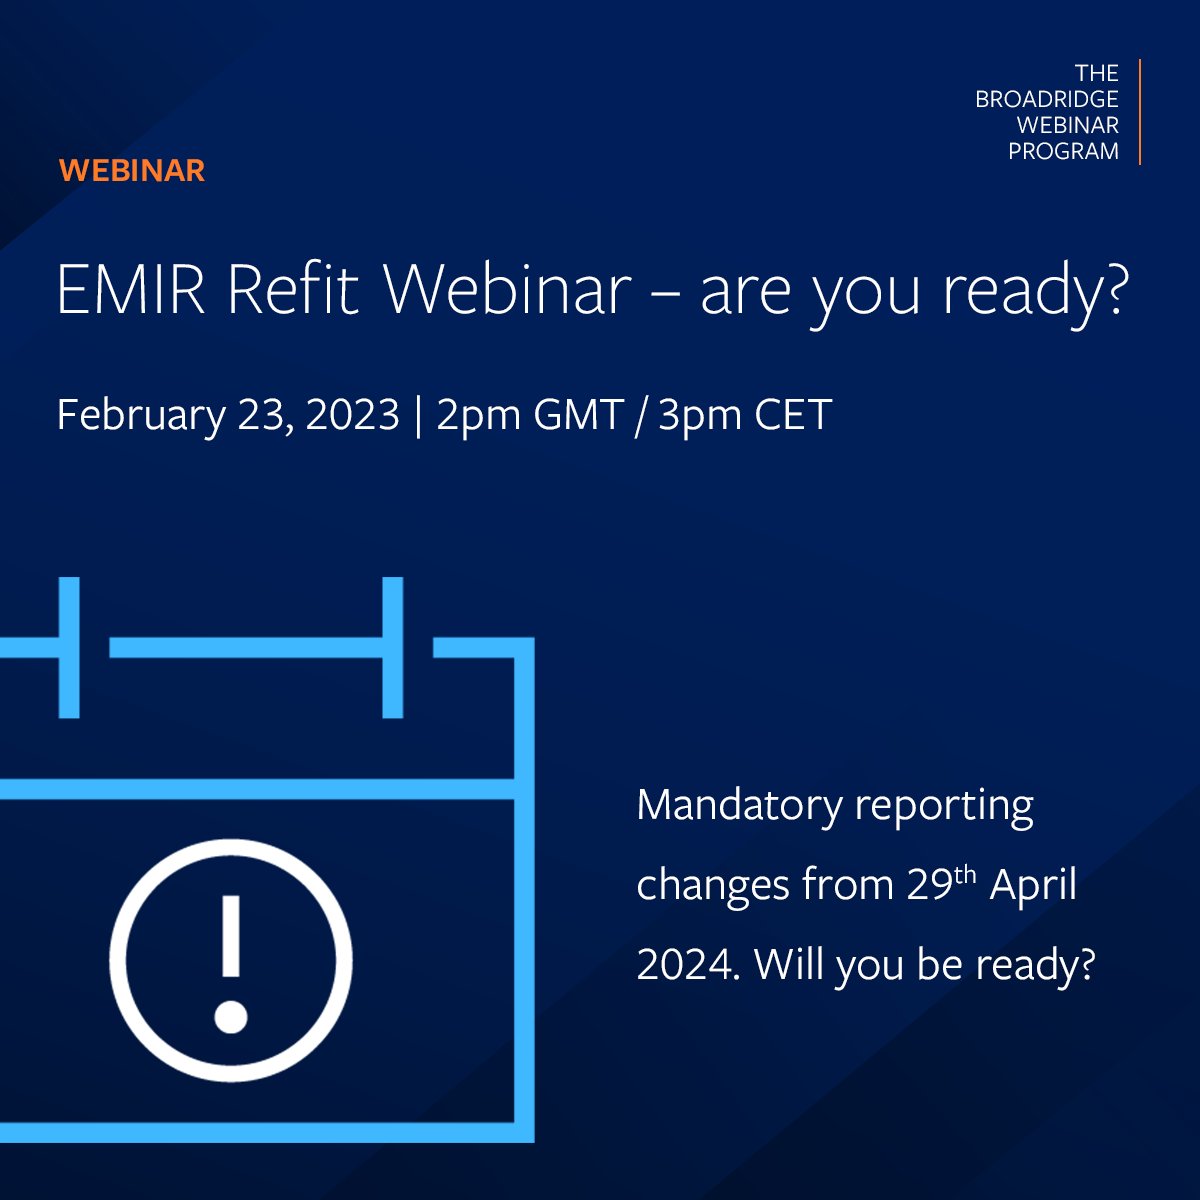 EMIR Refit goes live on 29th April 2024 and requires a significant change to the reportable fields and other important changes. Register for this webinar now to learn how you can future-proof your reporting set-up.

#EMIRRefit   bit.ly/3Ipuubh